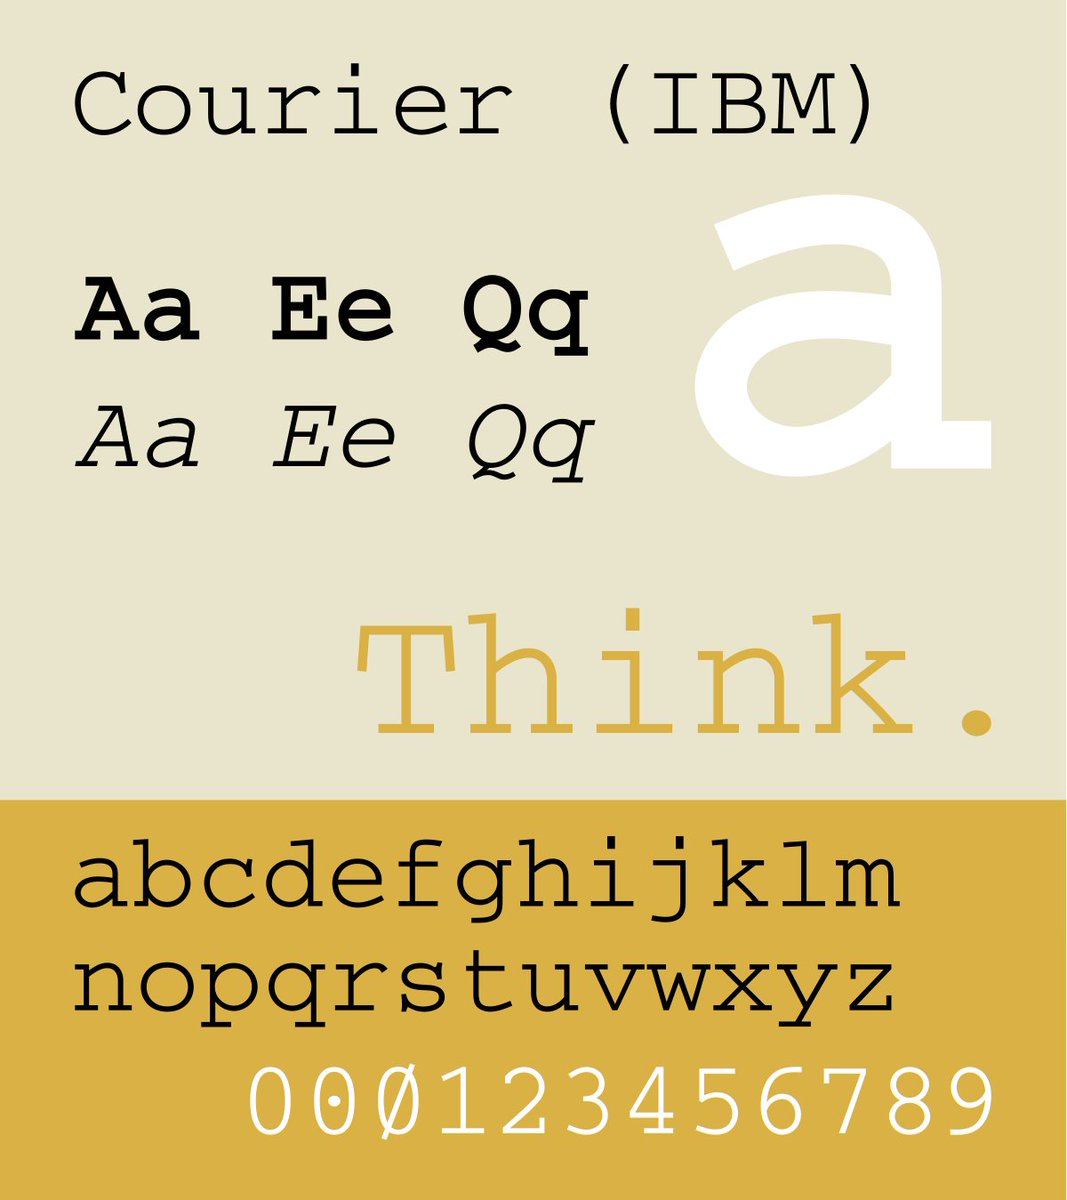 Courier New

Added to Windows 3.1 in 1992 (and present ever since) as a digitised version of Courier, which was itself designed by Howard Kettler for IBM in 1956.

Courier is the classic 'typewriter' font, famous for being used in all screenplays and in coding.